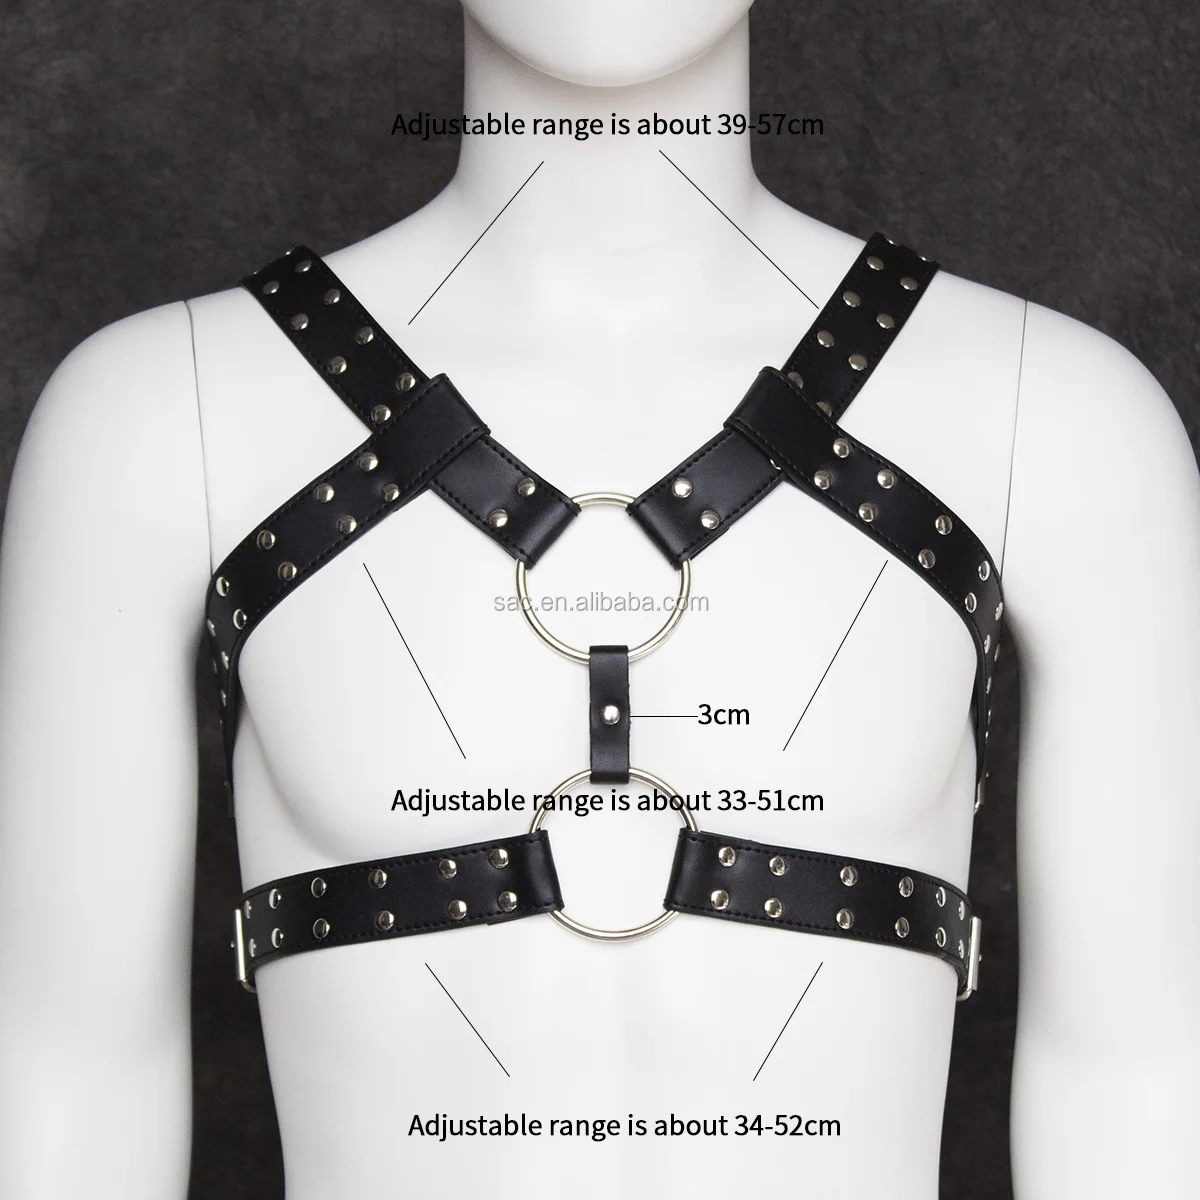 Wholesale SacKnove 19116 Cool Shoulder Chest Bdsm Bondage Suit Strap Men  Adult Sexy Leather Costumes Male Gays Fetish Body Harness Set From  m.